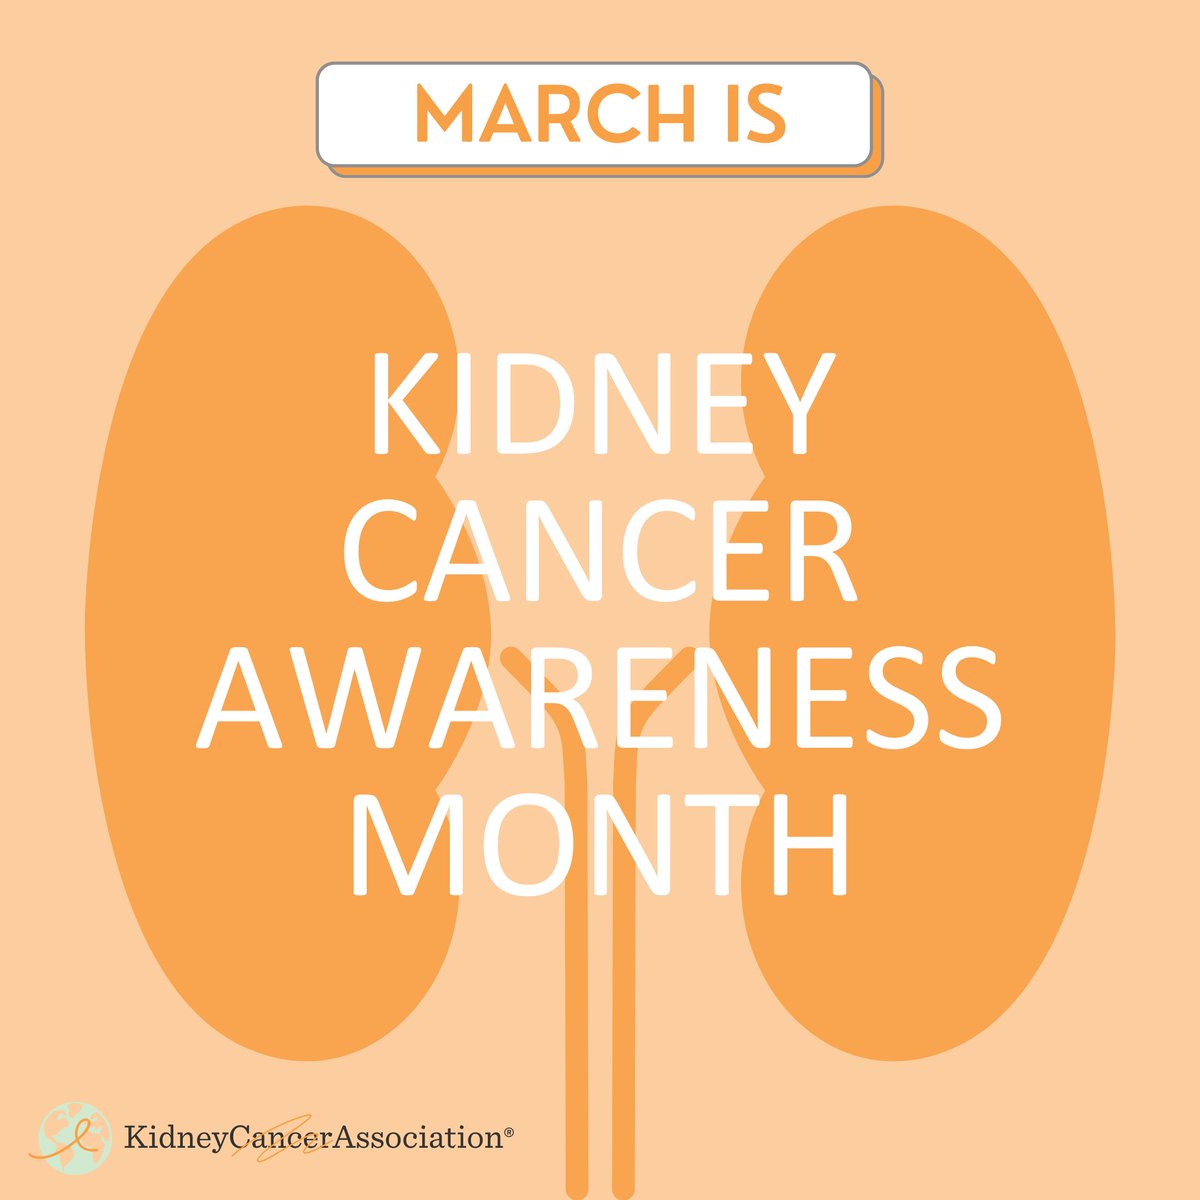 Less than a month 'til #KidneyCancerAwarenessMonth kicks off in March!!! Join us as we raise awareness, share stories of resilience, and #OrangeUp! kidneycancer.org/kidney-cancer-… Follow along, share, or comment how you plan to get involved. 🧡⤵️